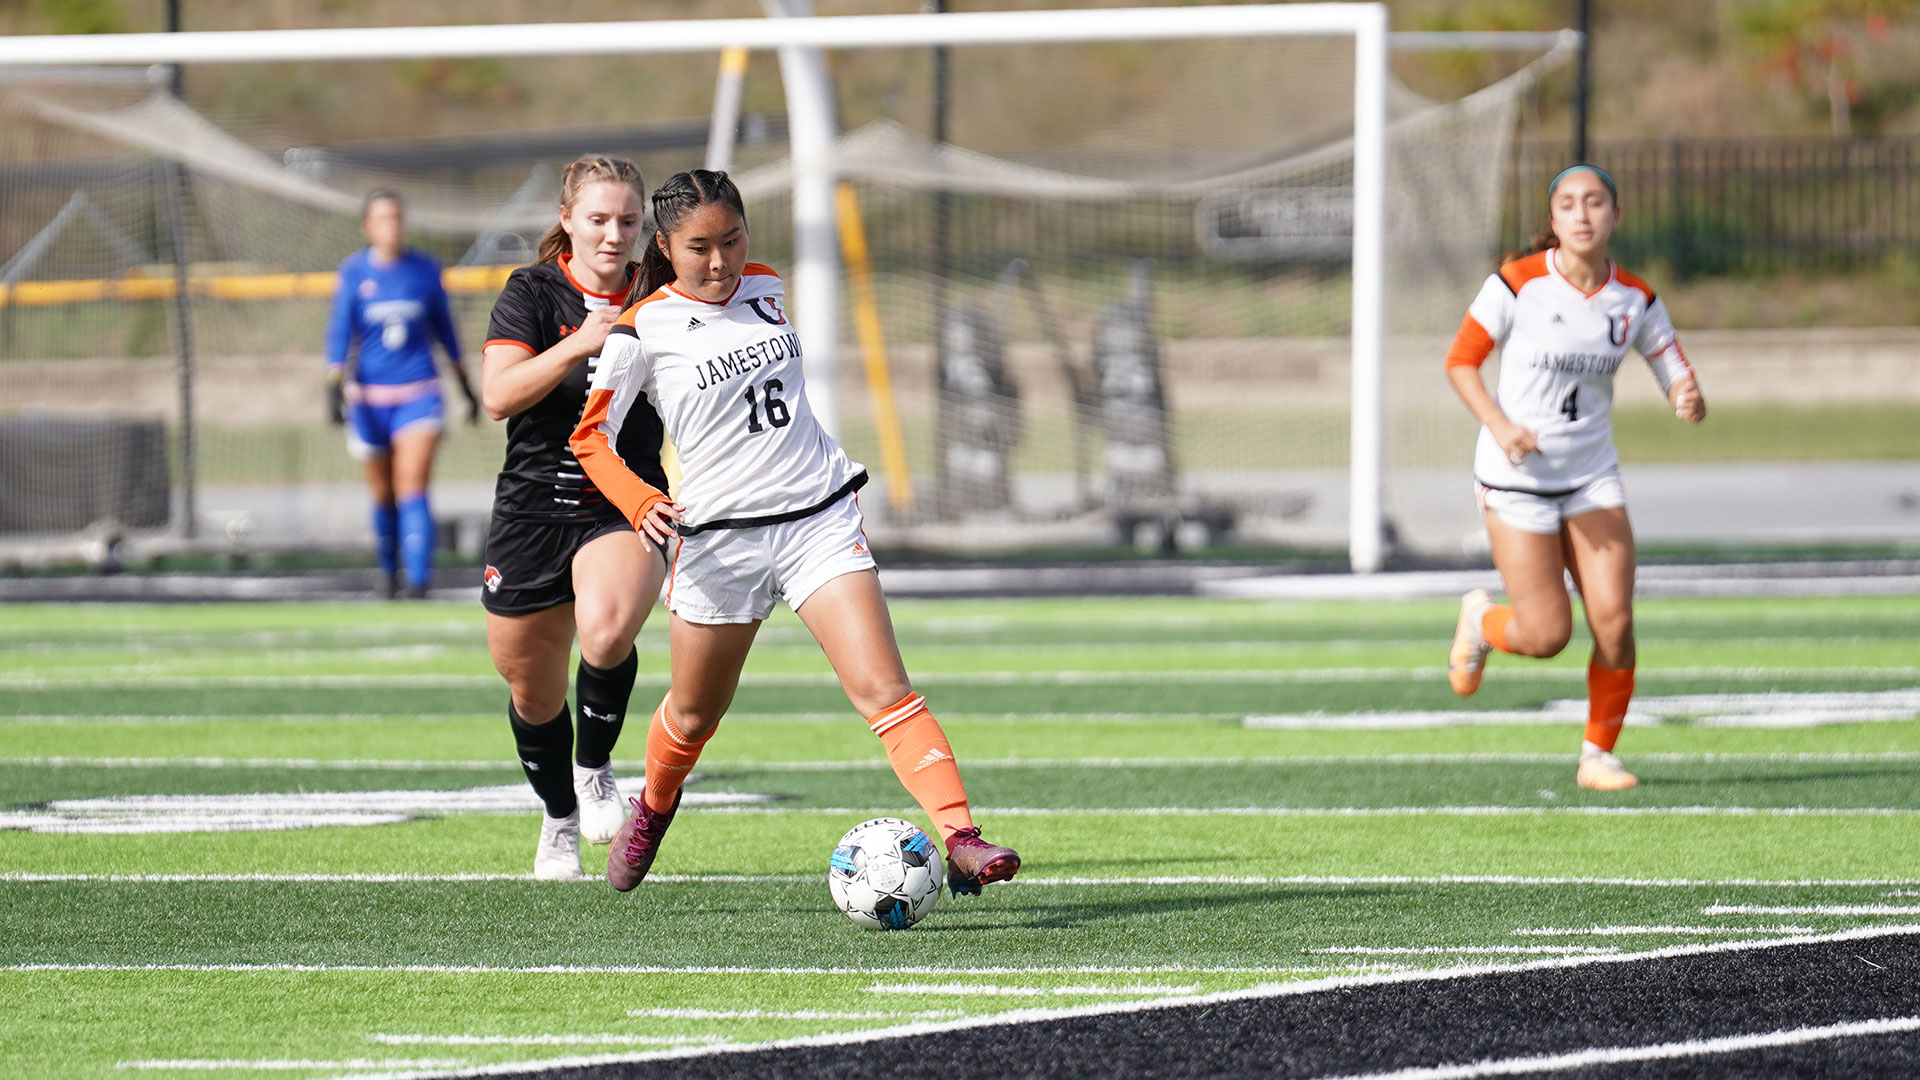 Kyla Yamada was one of four players to have a goal for UJ on Saturday / Photo by Alex Maida